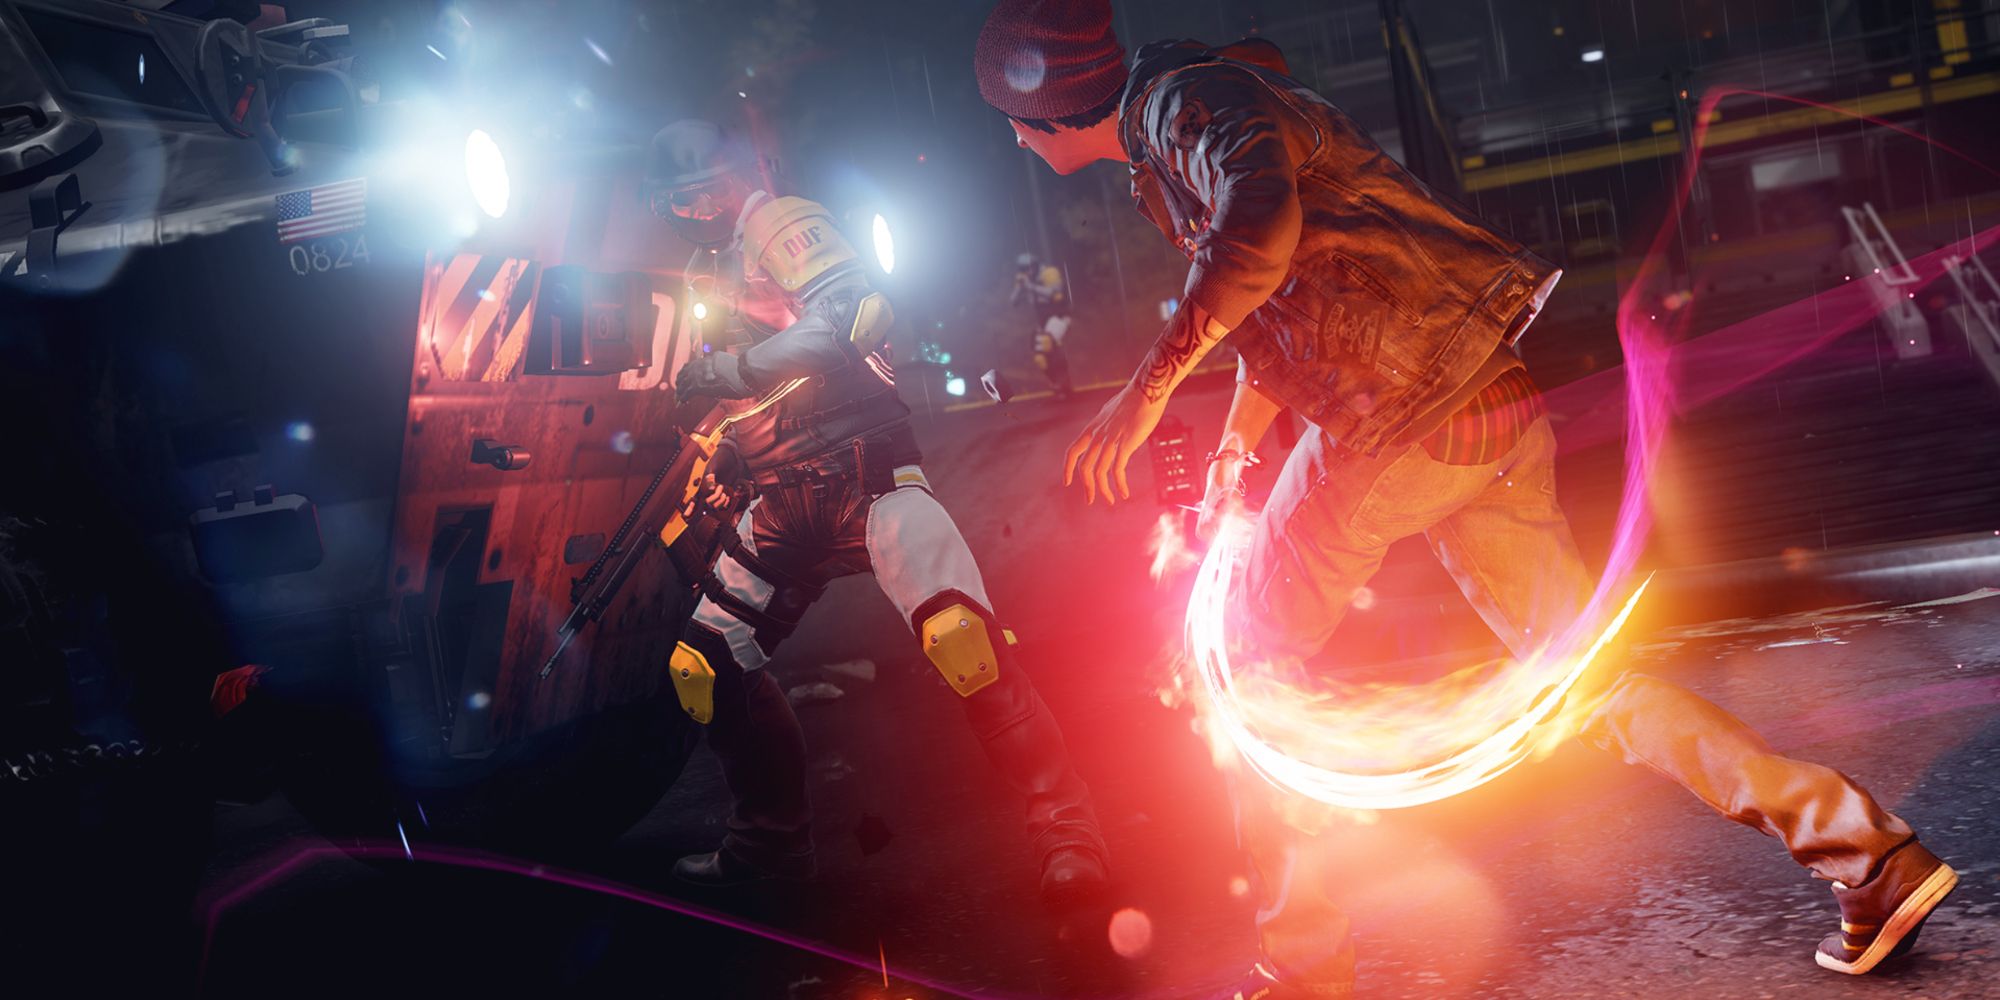 Delsin attacking law enforcement with Neon powers